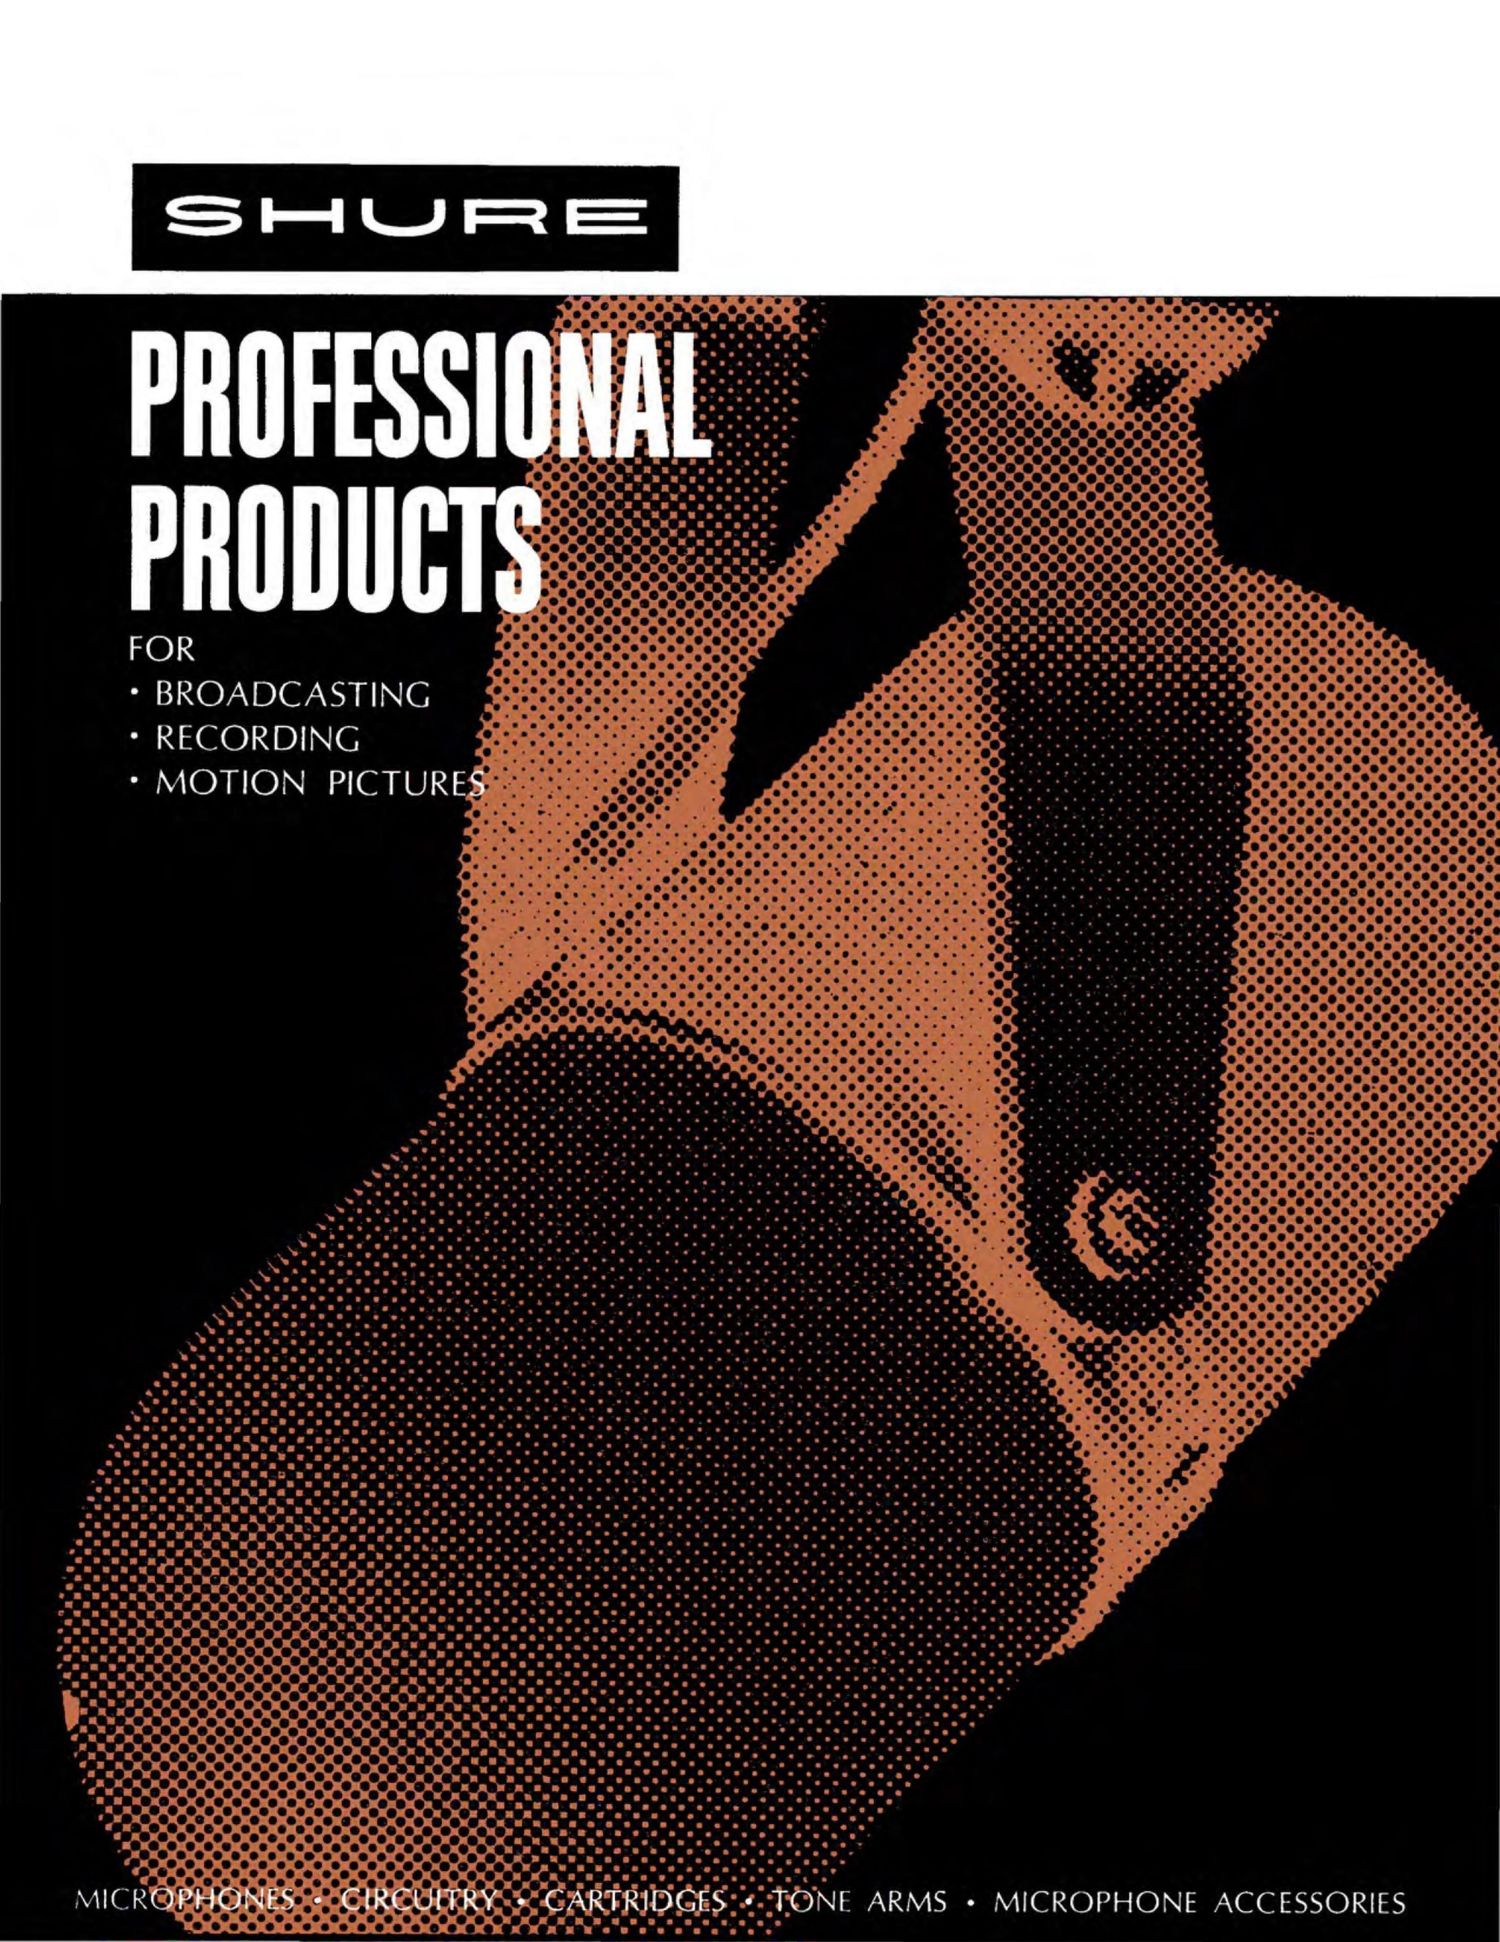 shure 1969 catalogue professional products